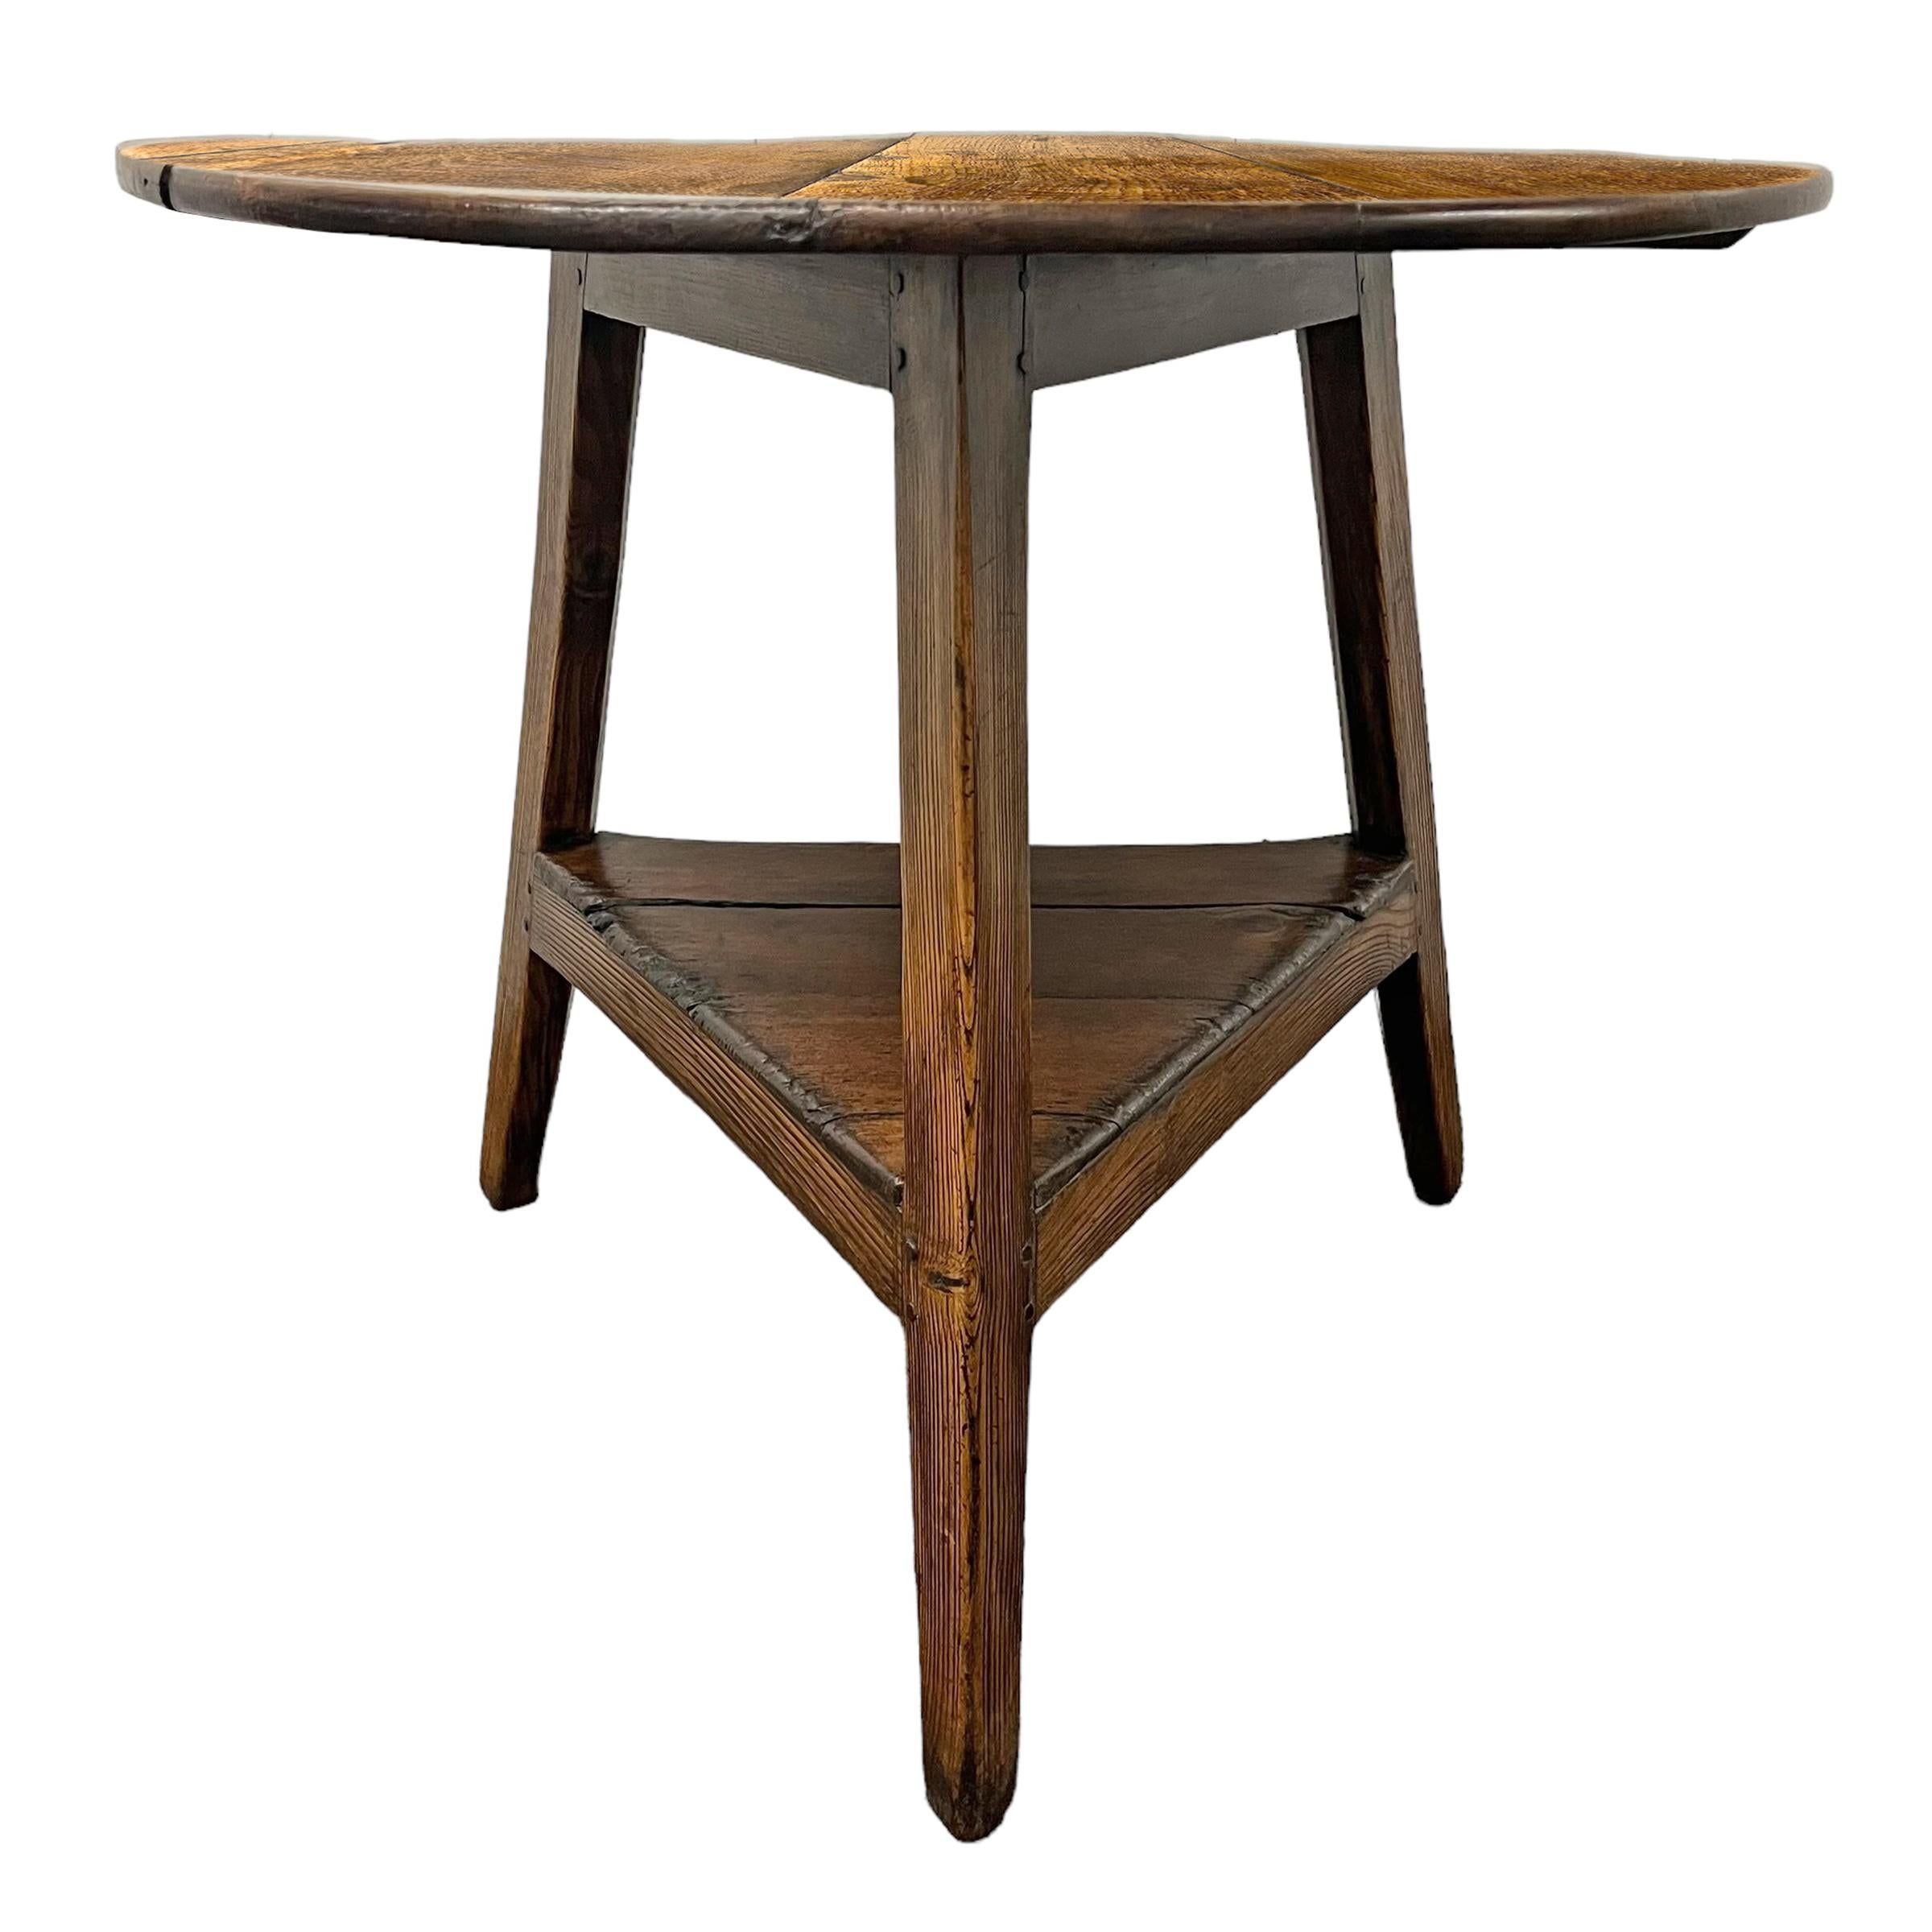 Primitive Late 18th Century English Cricket Table with Shelf